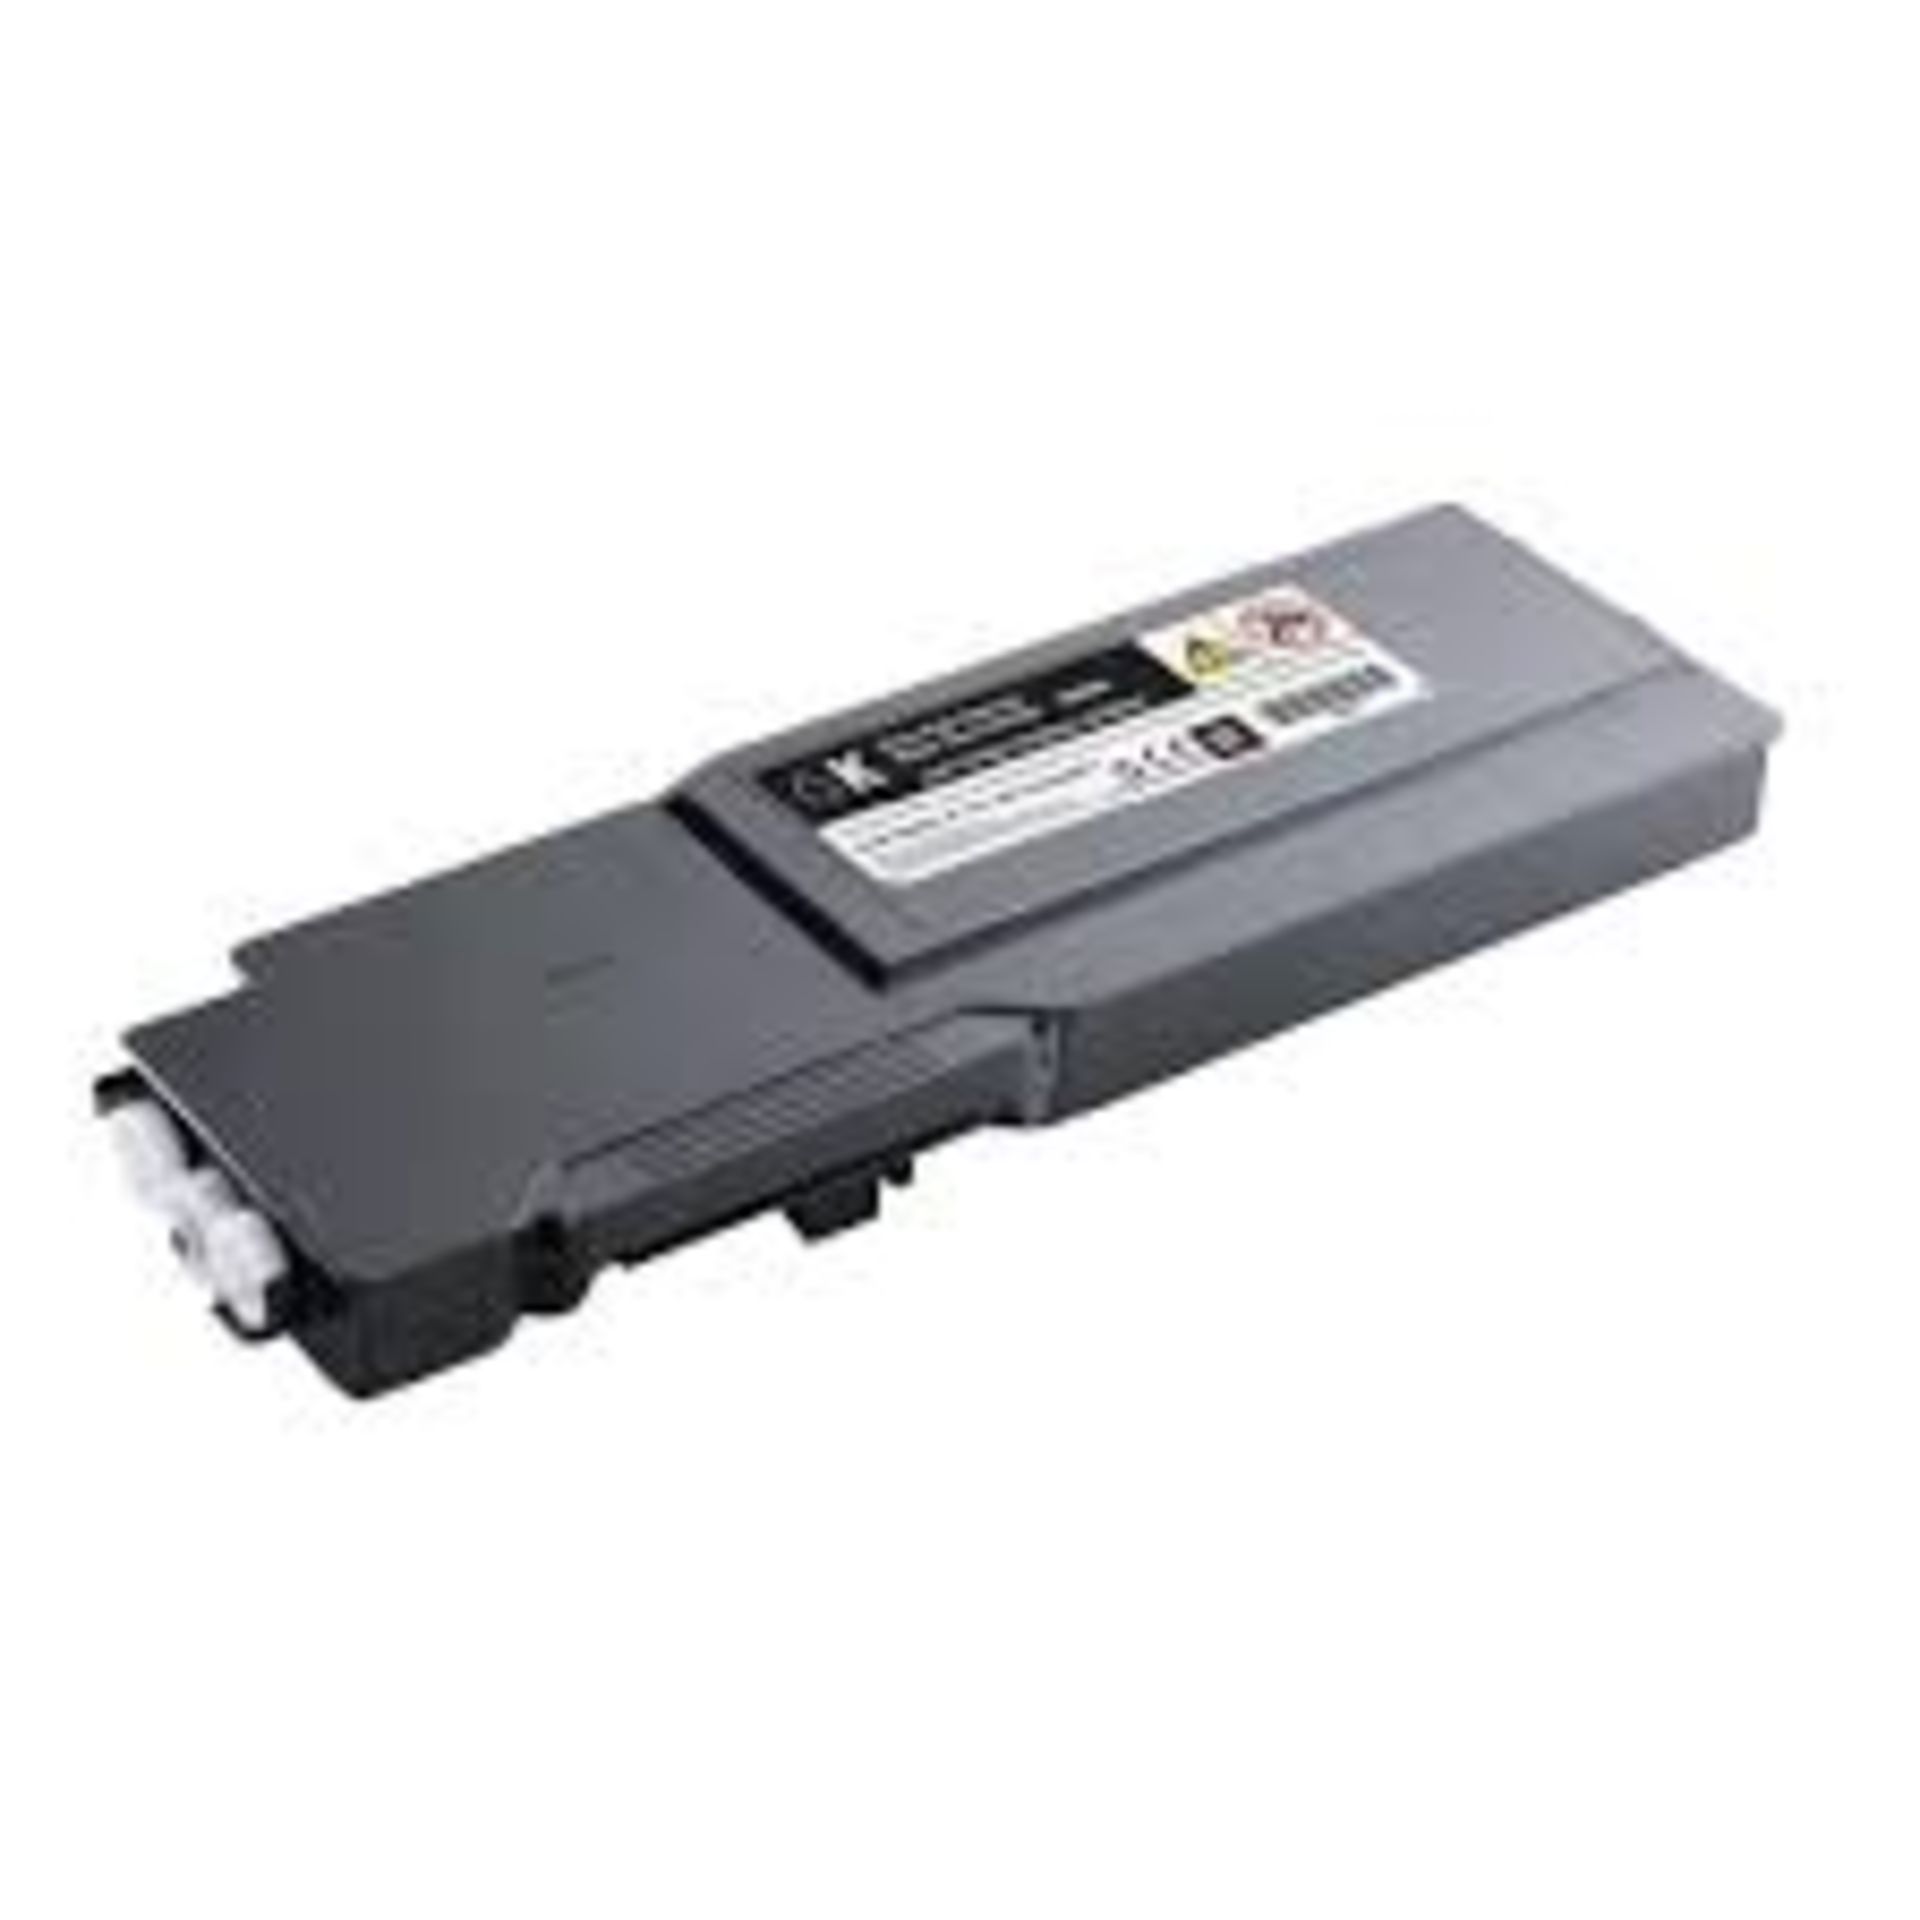 OVER 16000 BRAND NEW PRINTER CARTRIDGES/TONERS COMPATIBLE WITH BROTHER, EPSON, HP, CANON ETC. OVER 3 - Image 5 of 10